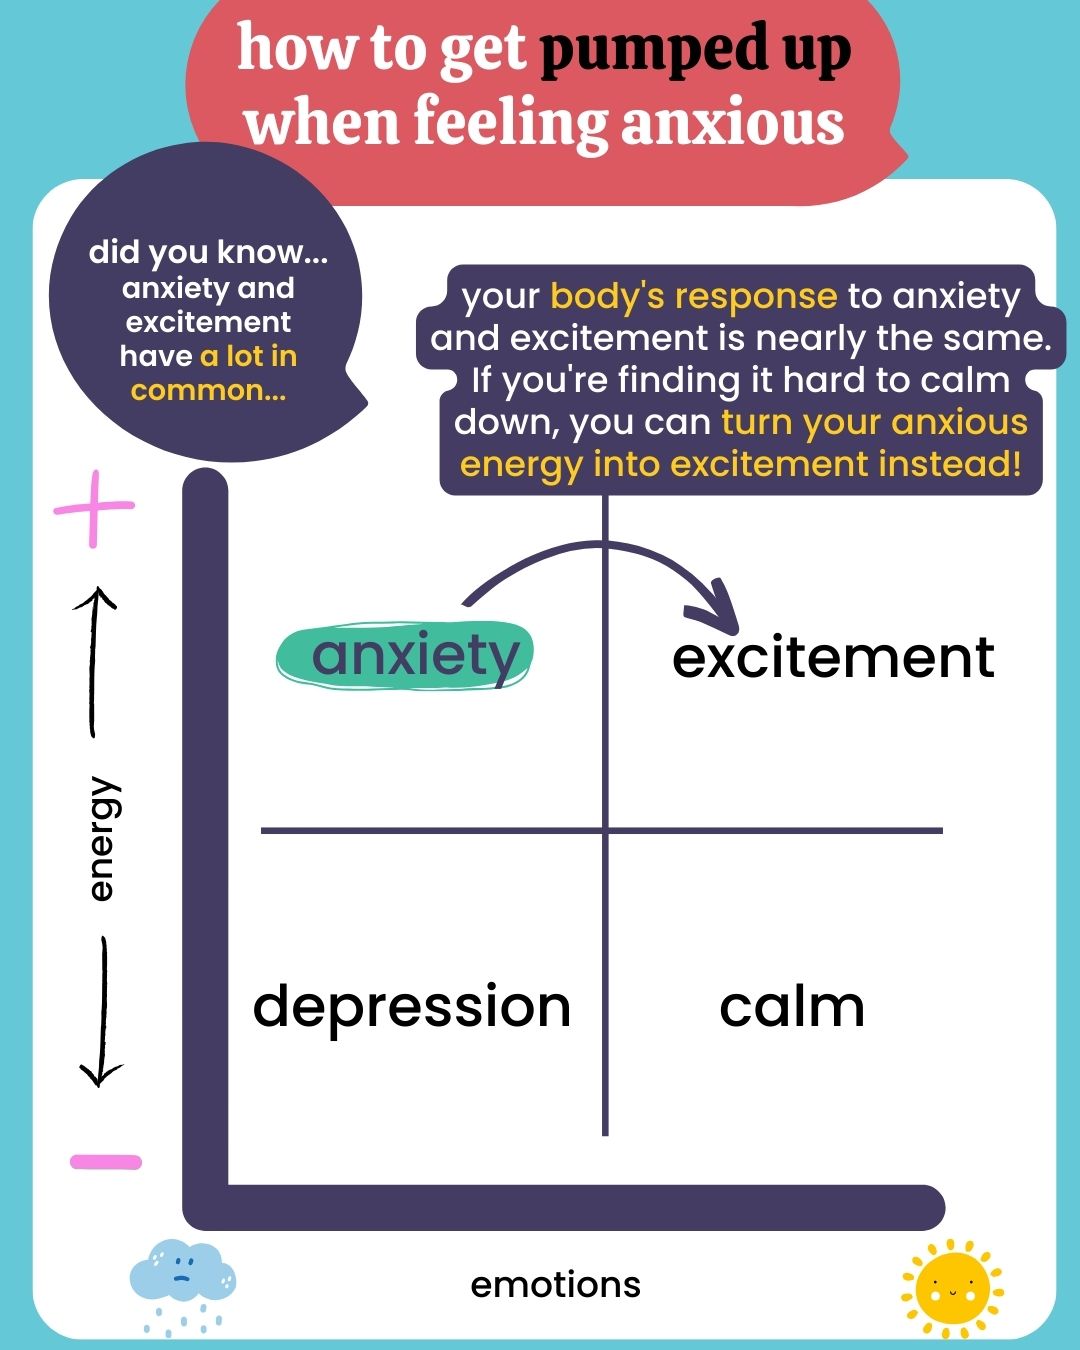 did you know... anxiety and excitement have a lot in common...  your body's response to anxiety and excitement is nearly the same. if you're finding it hard to calm down, you can turn your anxious energy into excitement instead!